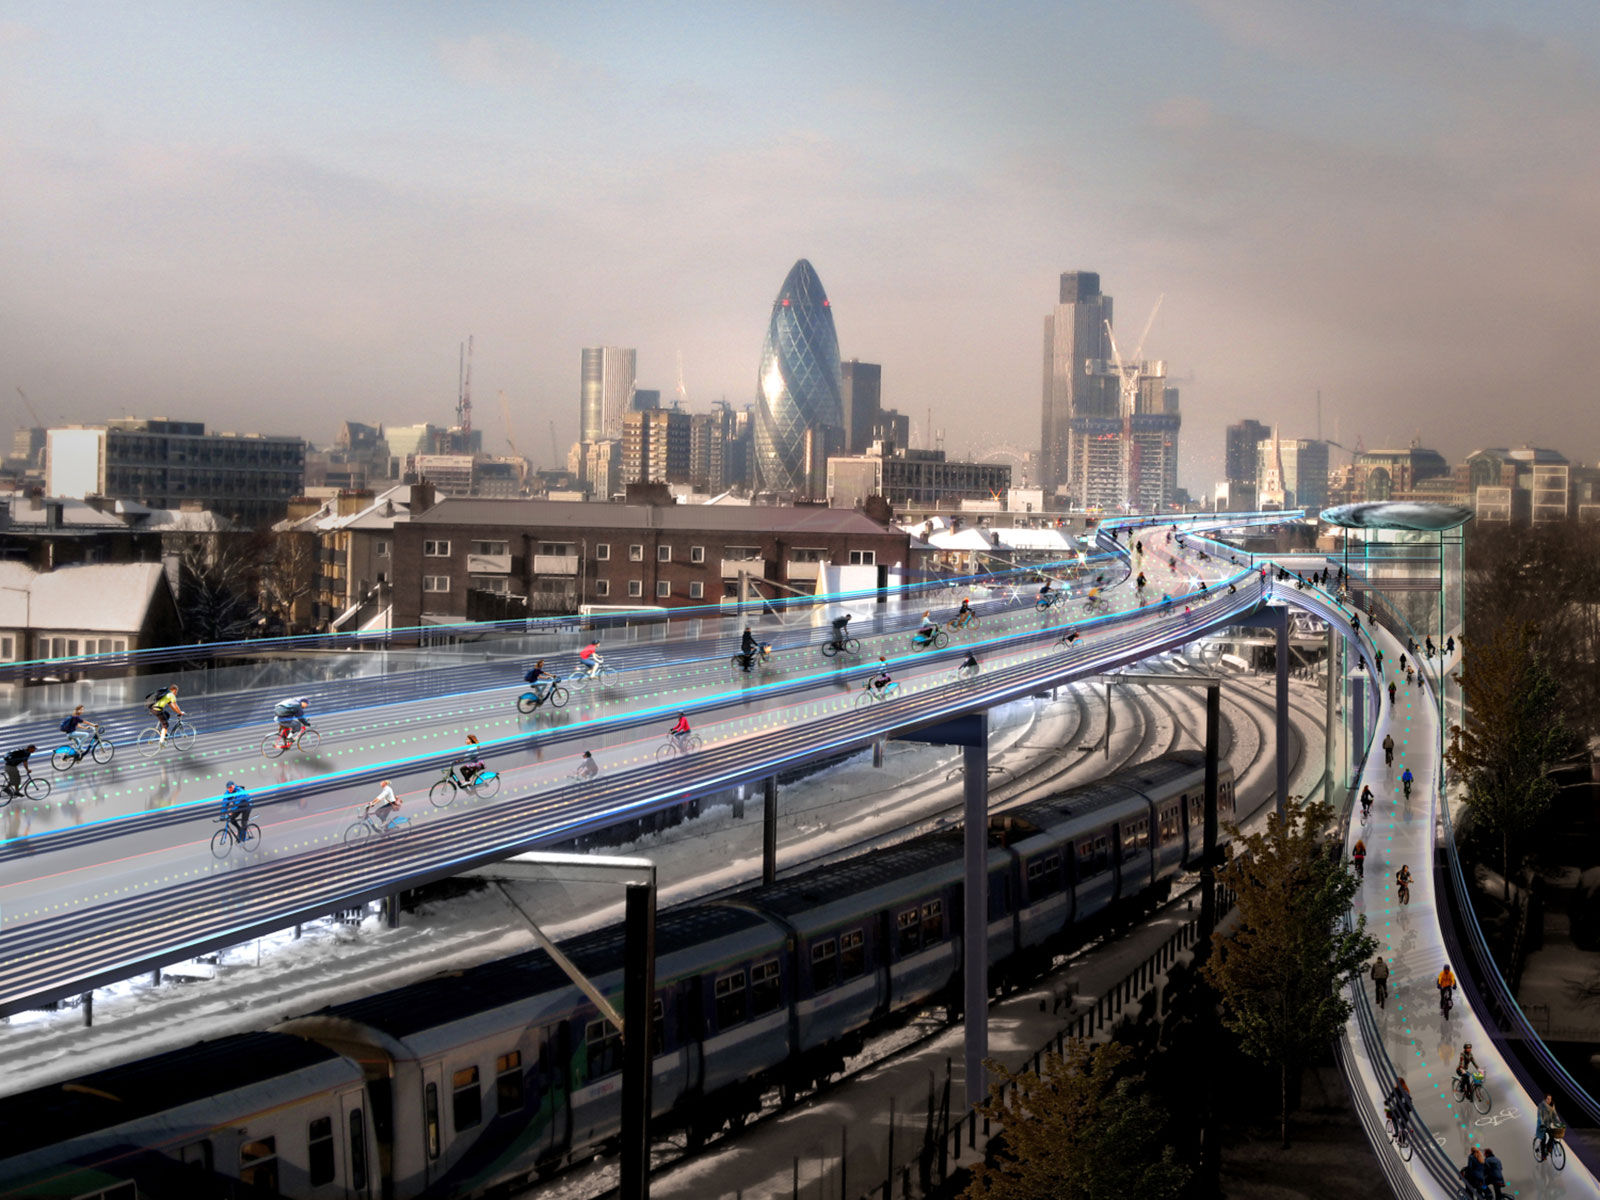 A Proposed SkyCycle bicycle highway for London